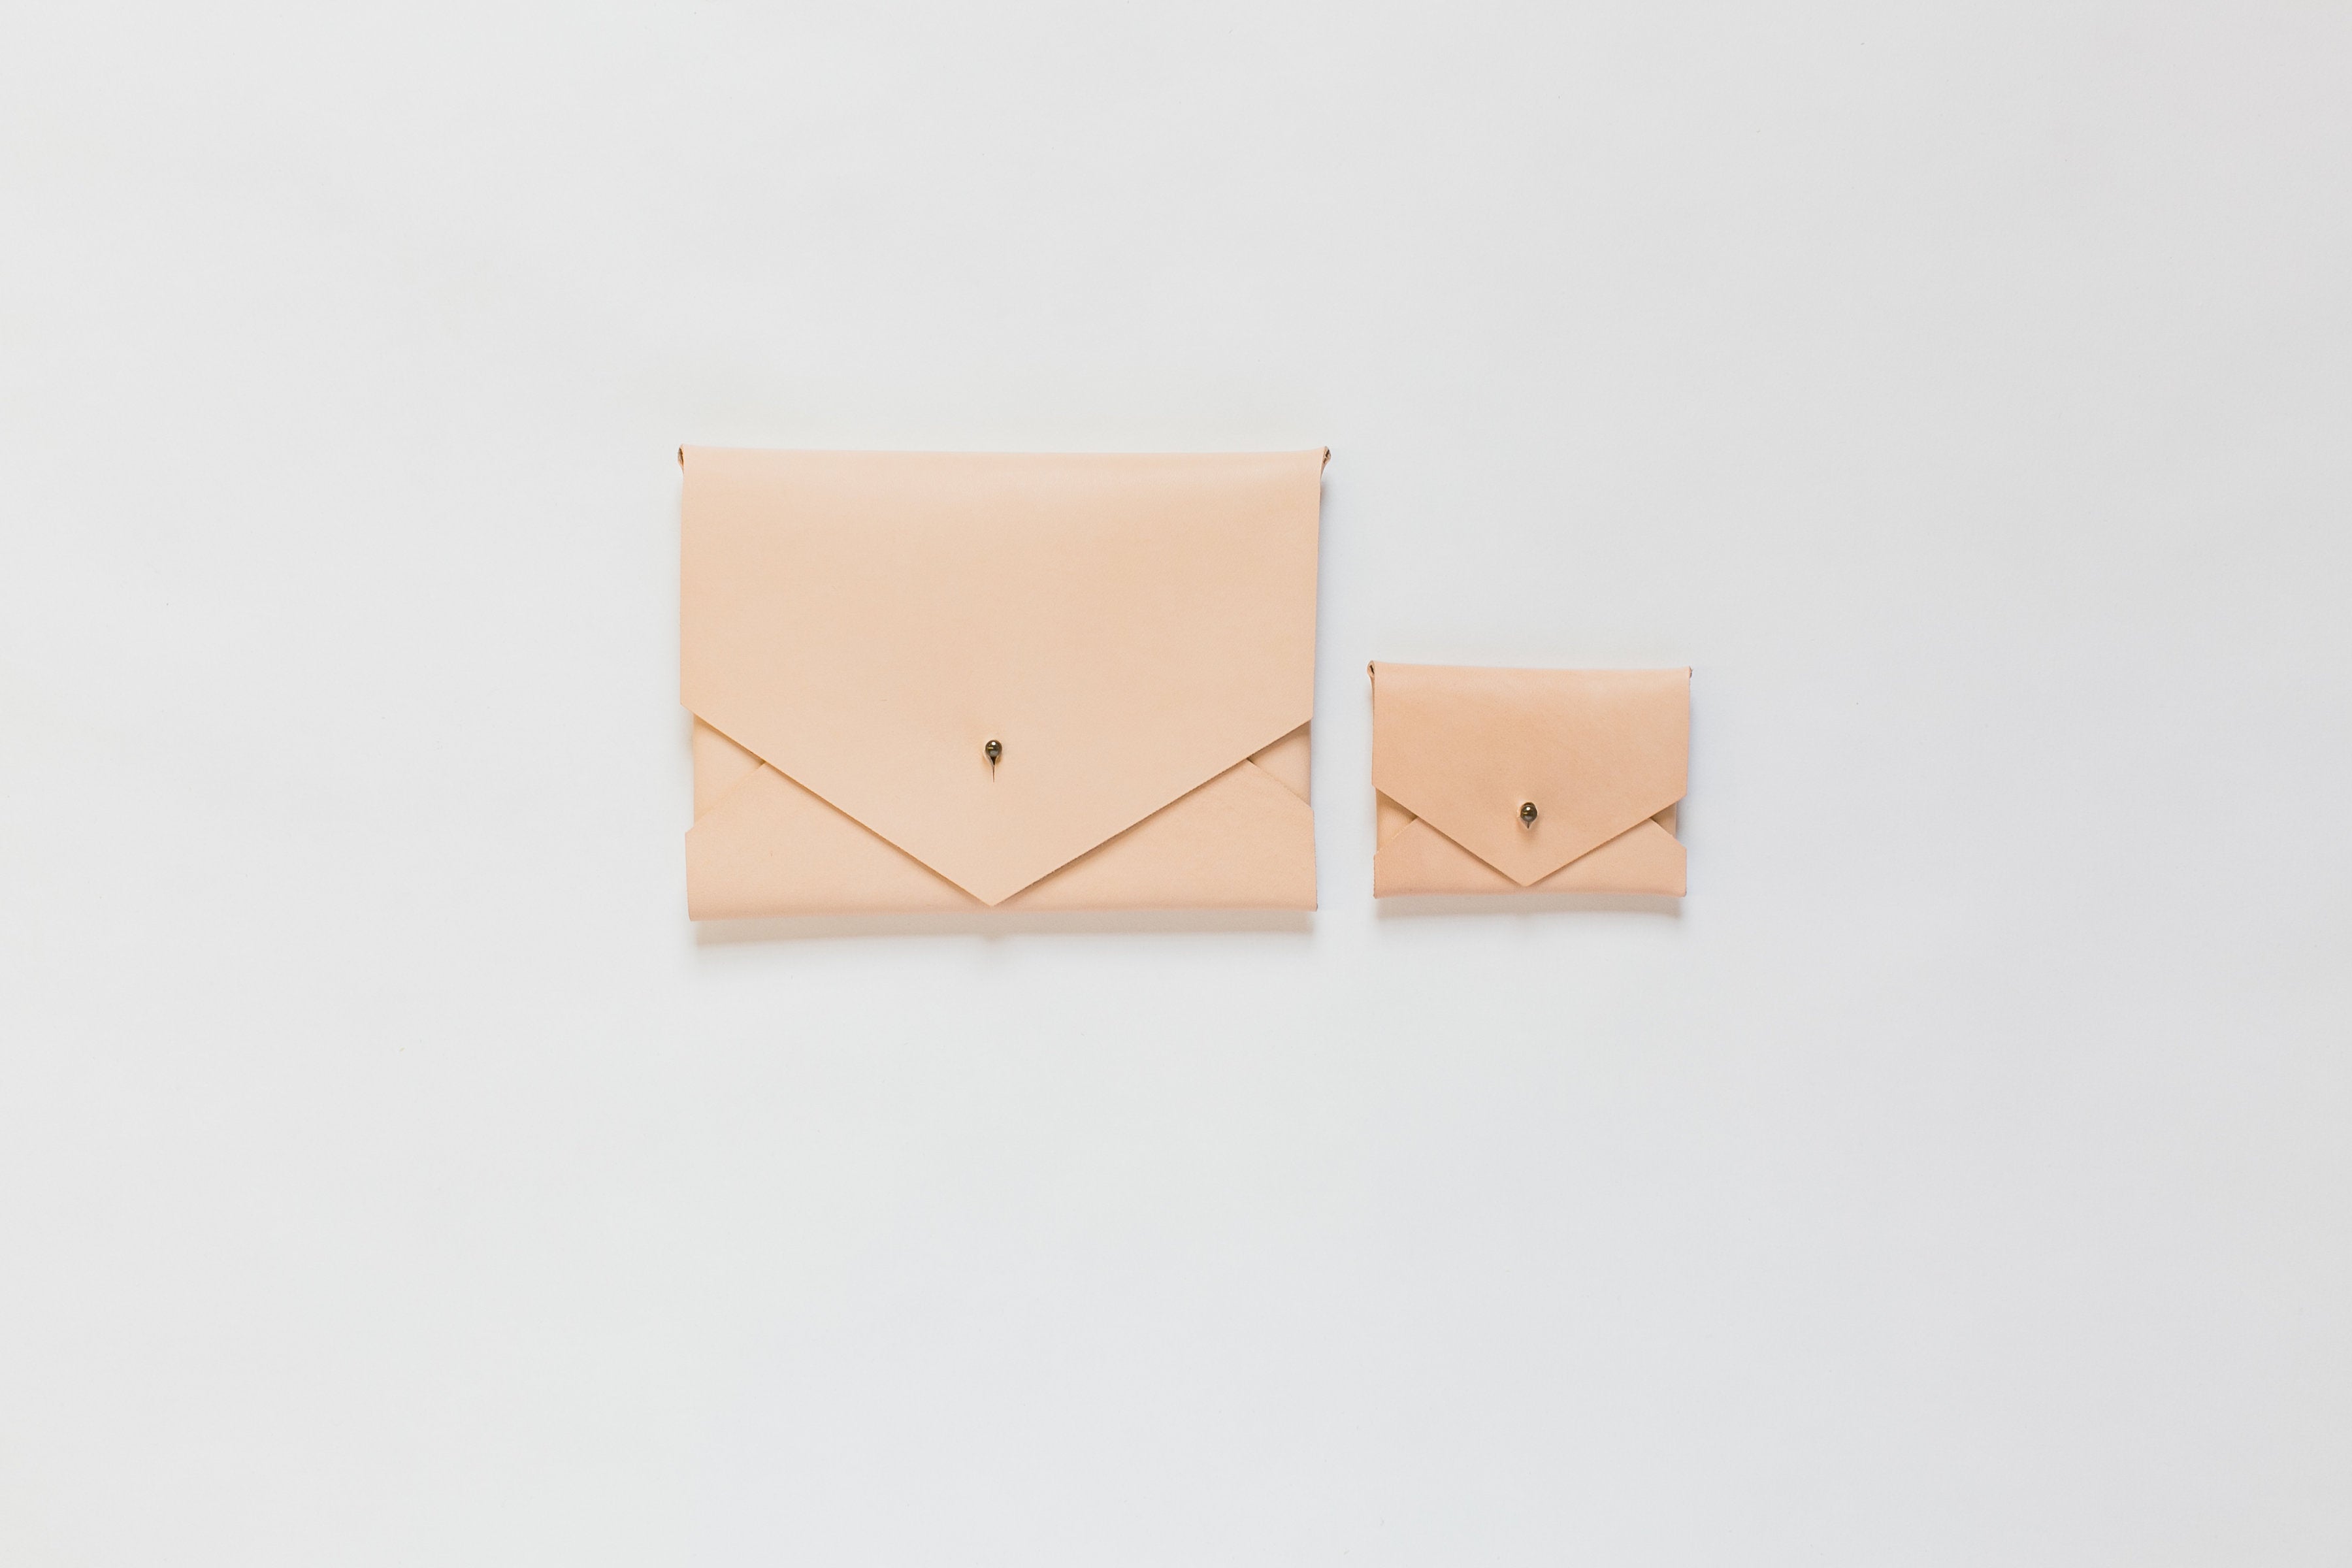 The Envelope Clutch